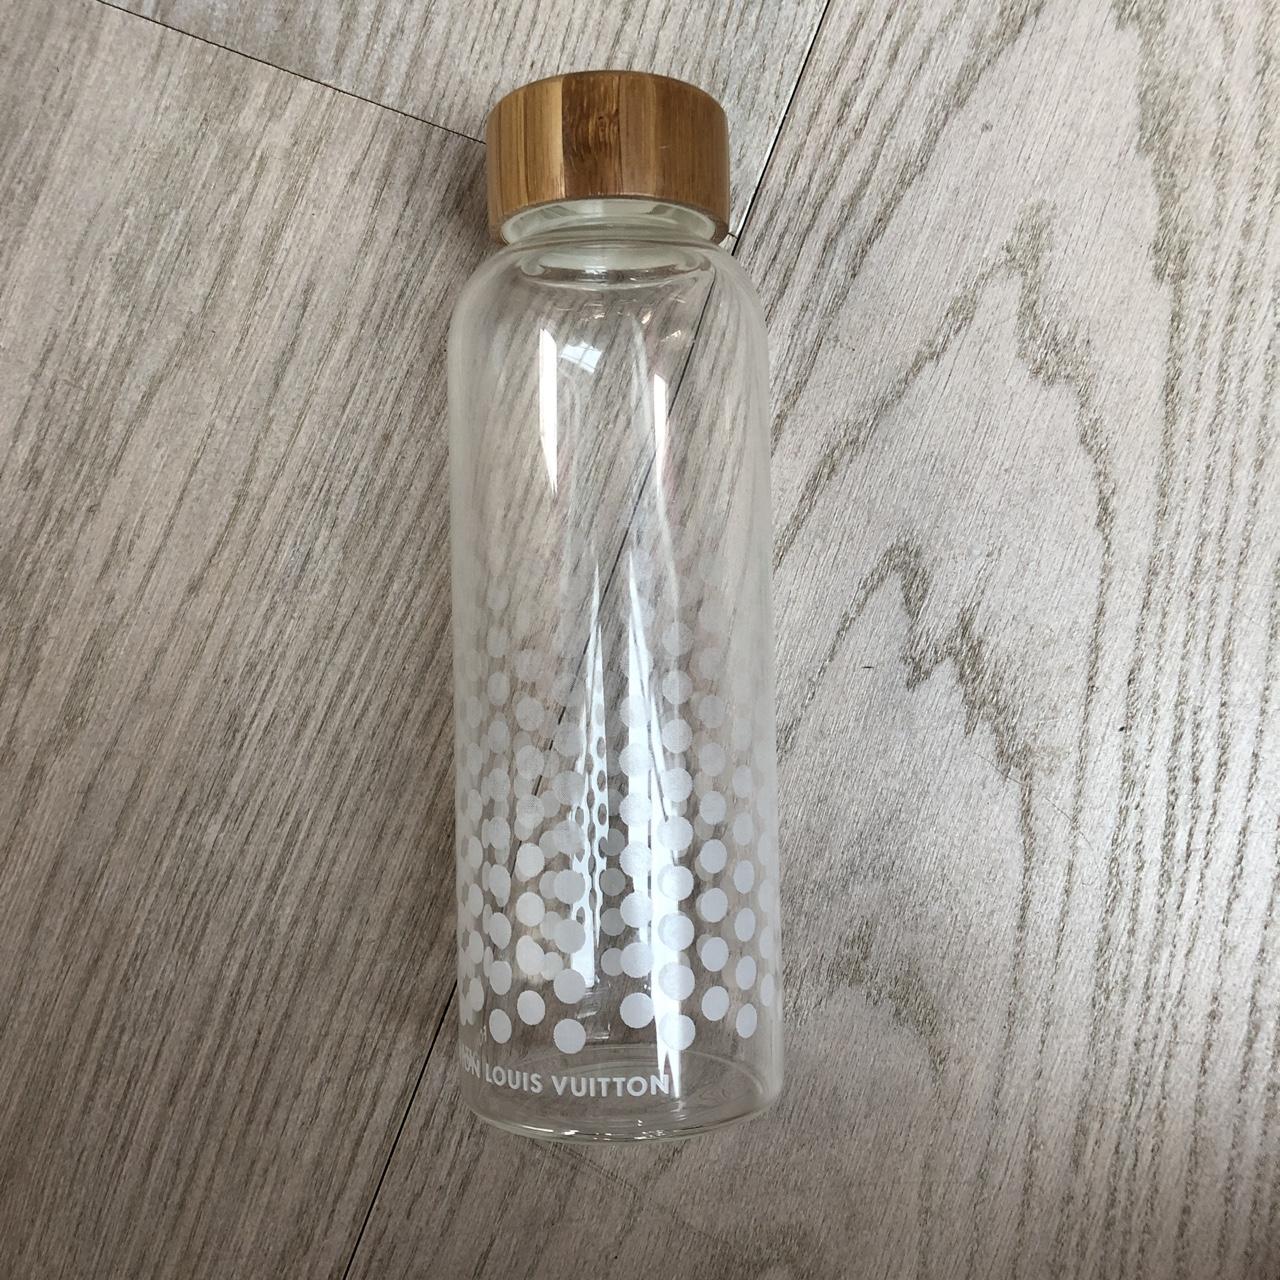 Louis Vuitton glass water bottle (New) 🧶Size: O/S🧶 💰Price: $120